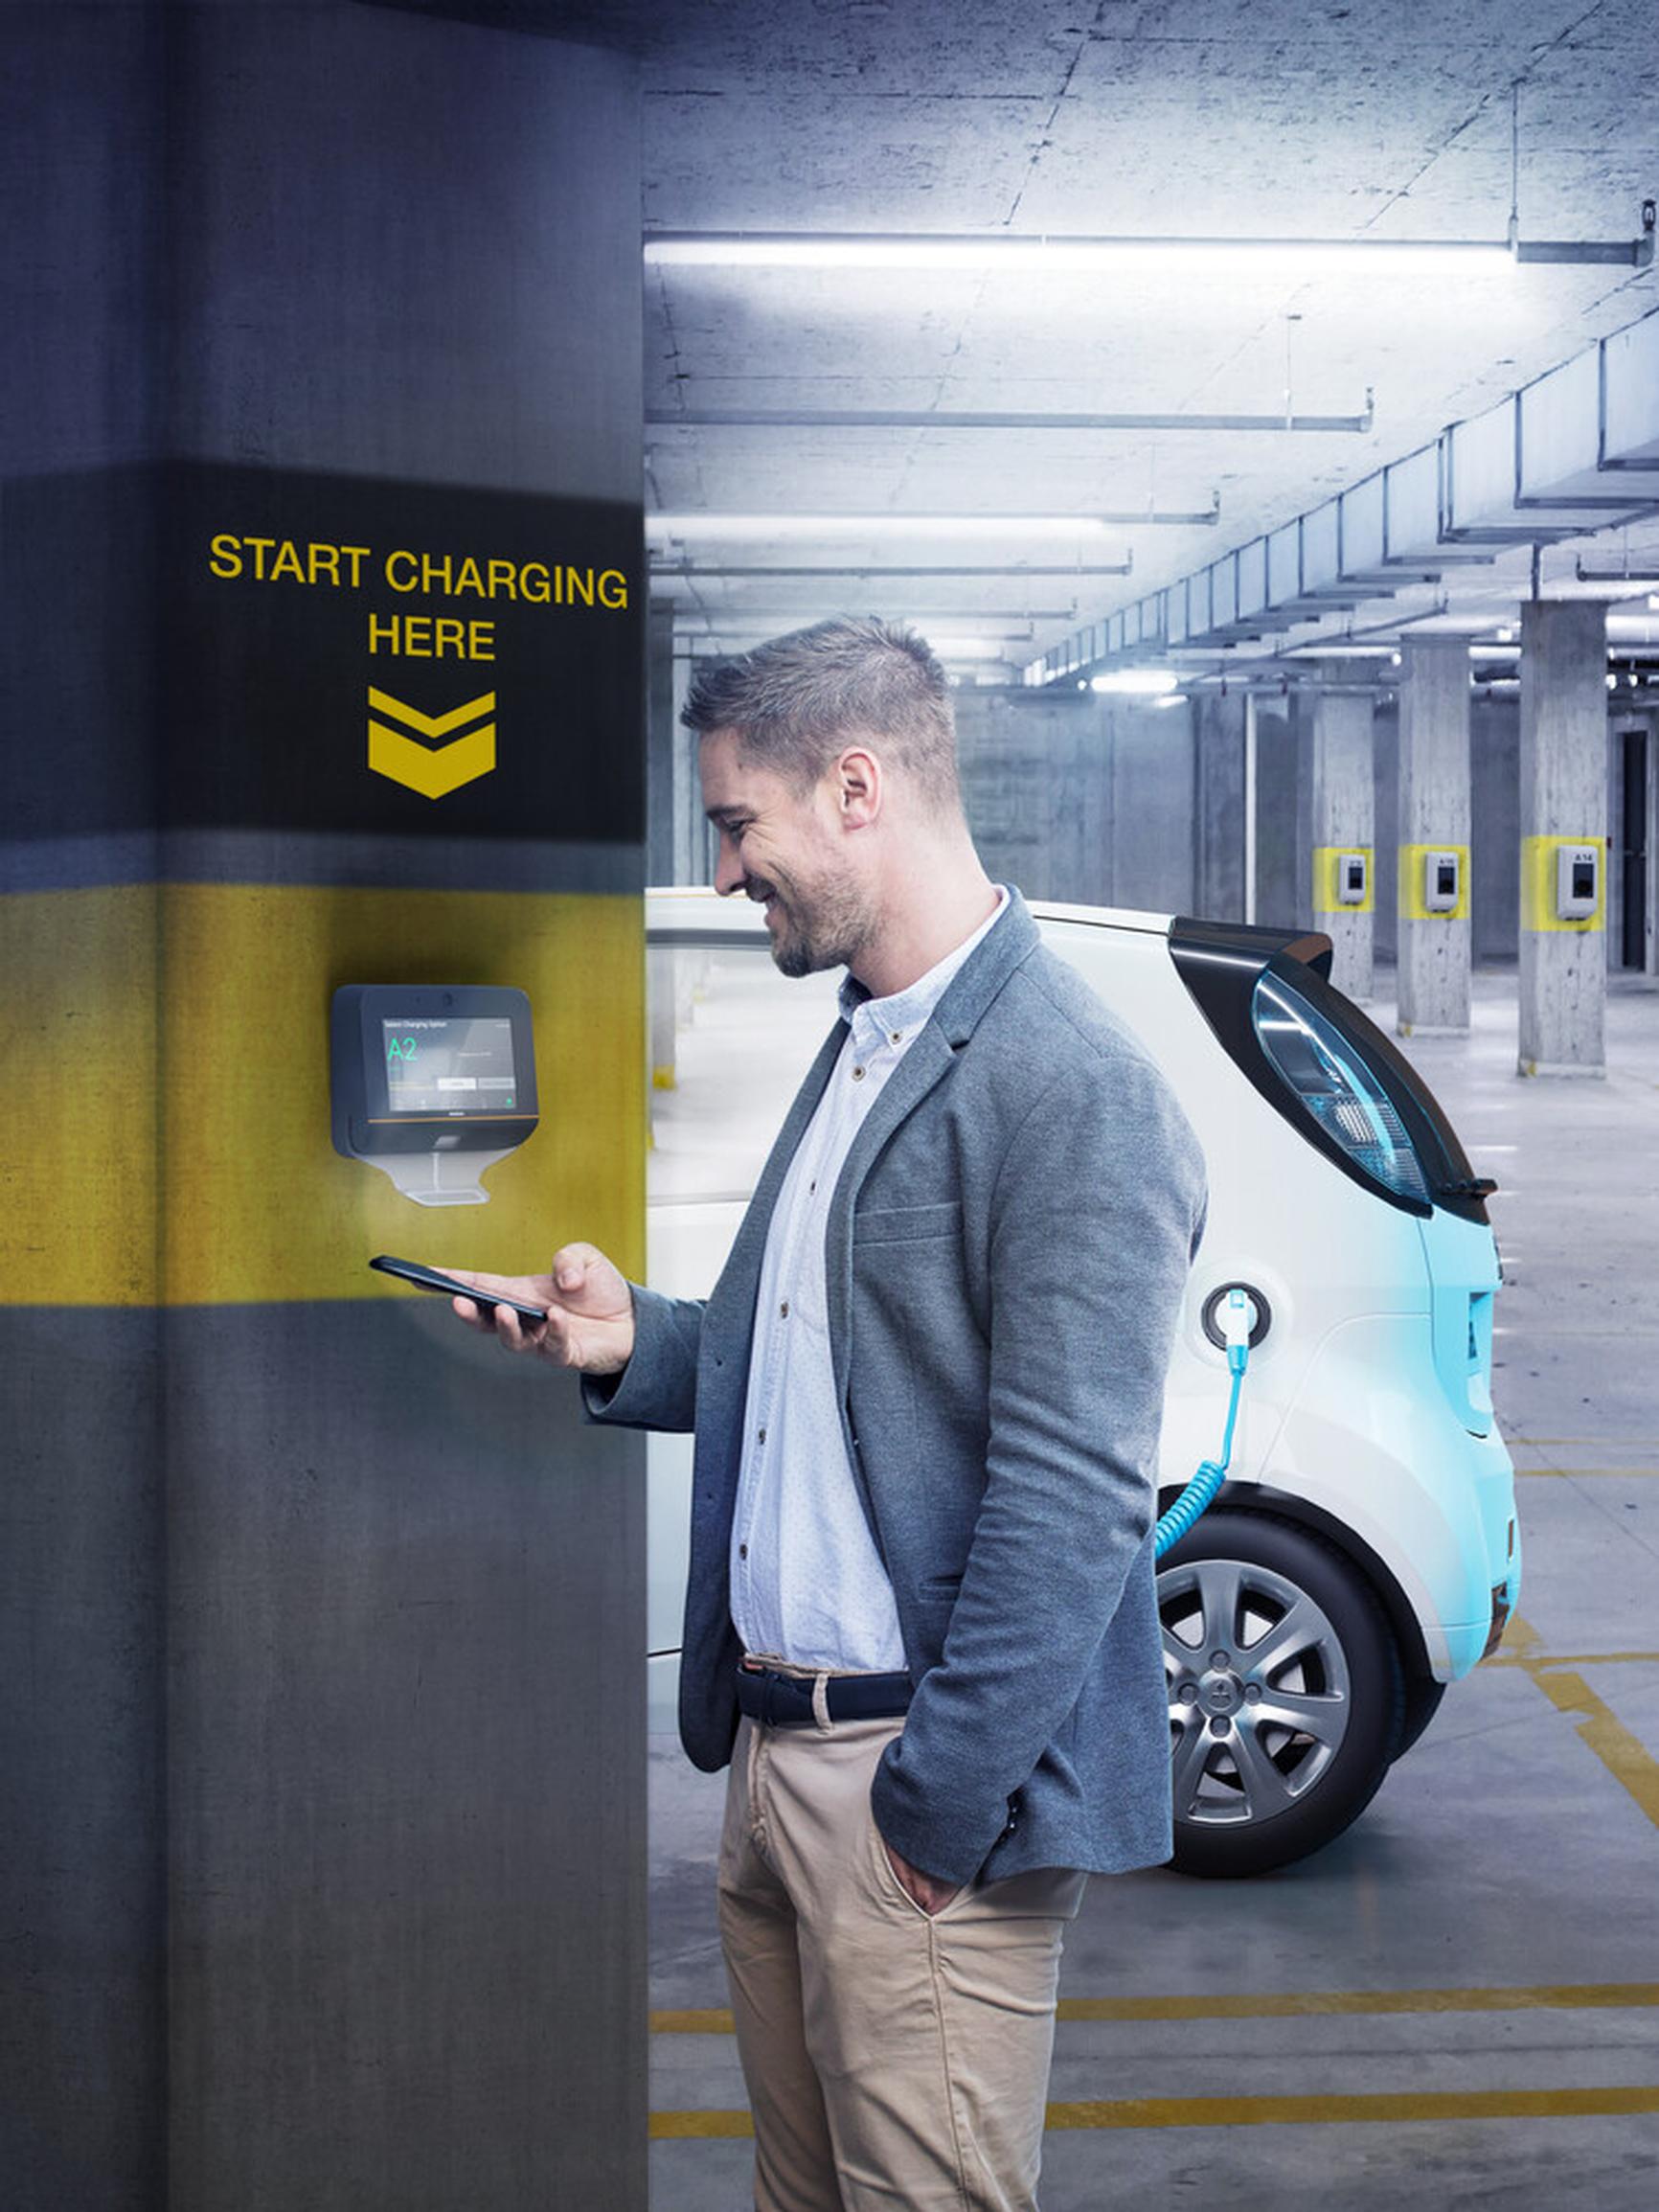 APT Skidata launches Charge integrated parking and EV charging